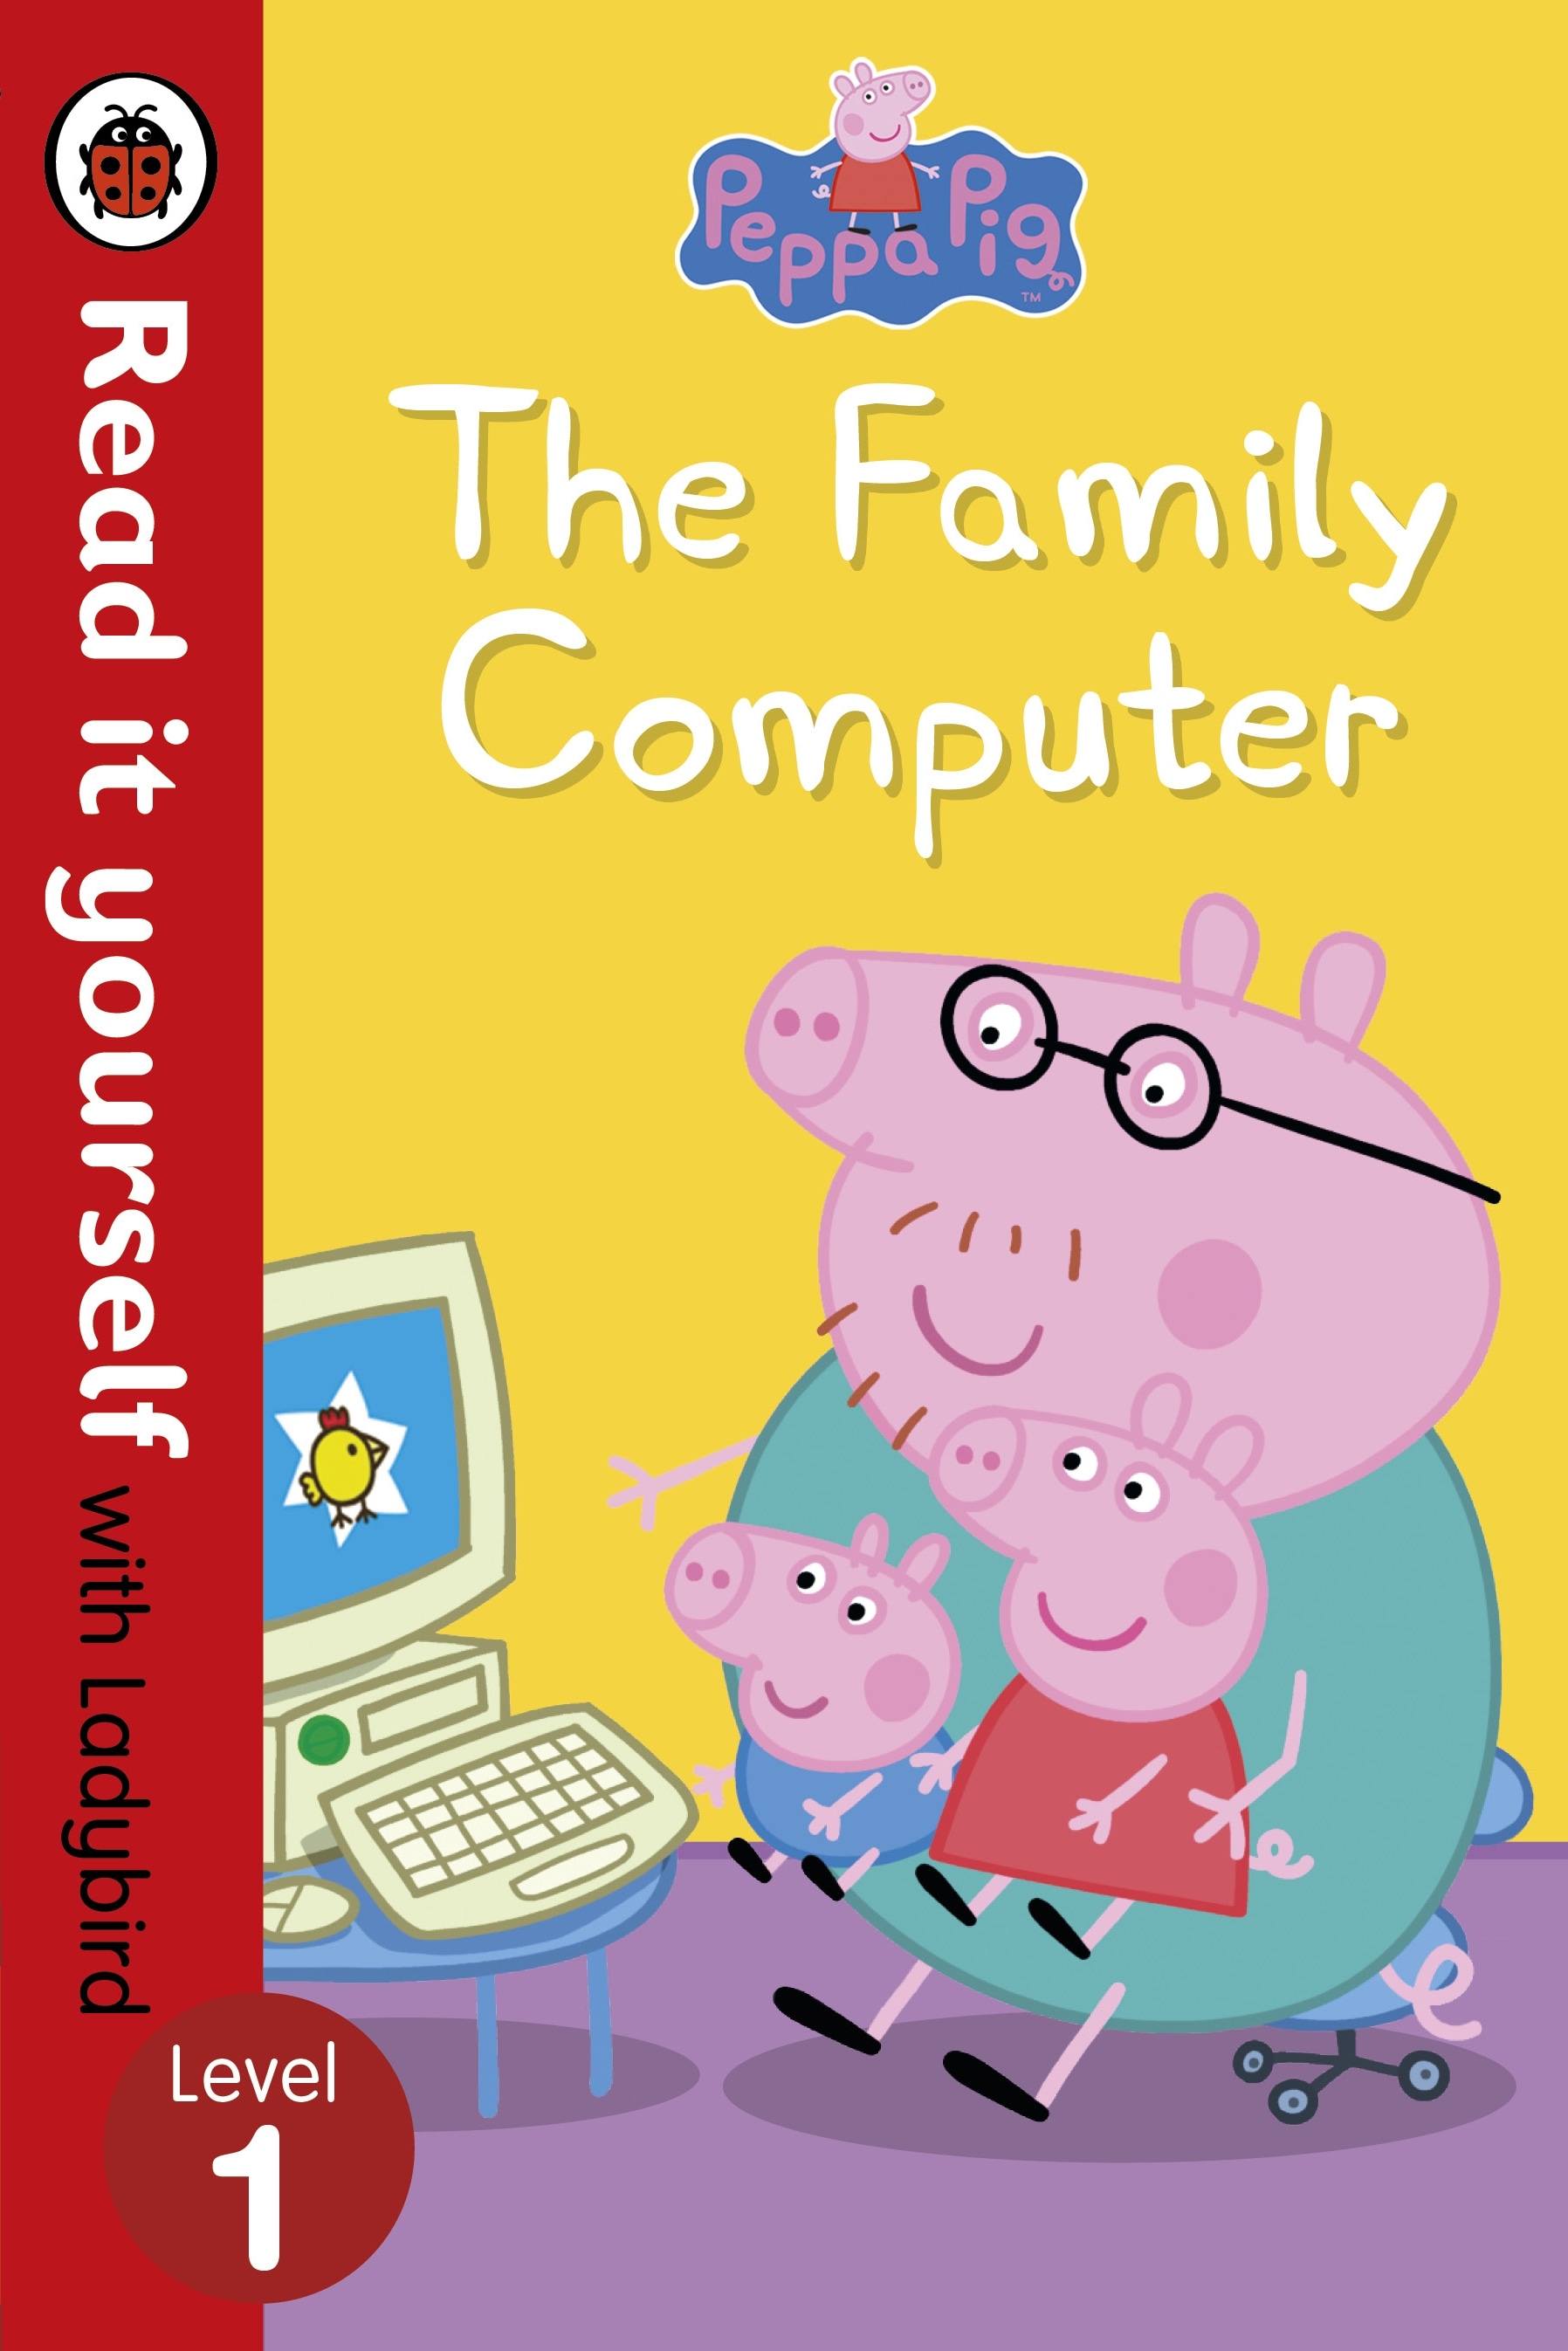 Book “Peppa Pig: The Family Computer - Read It Yourself with Ladybird Level 1” by Ladybird, Peppa Pig — July 7, 2016